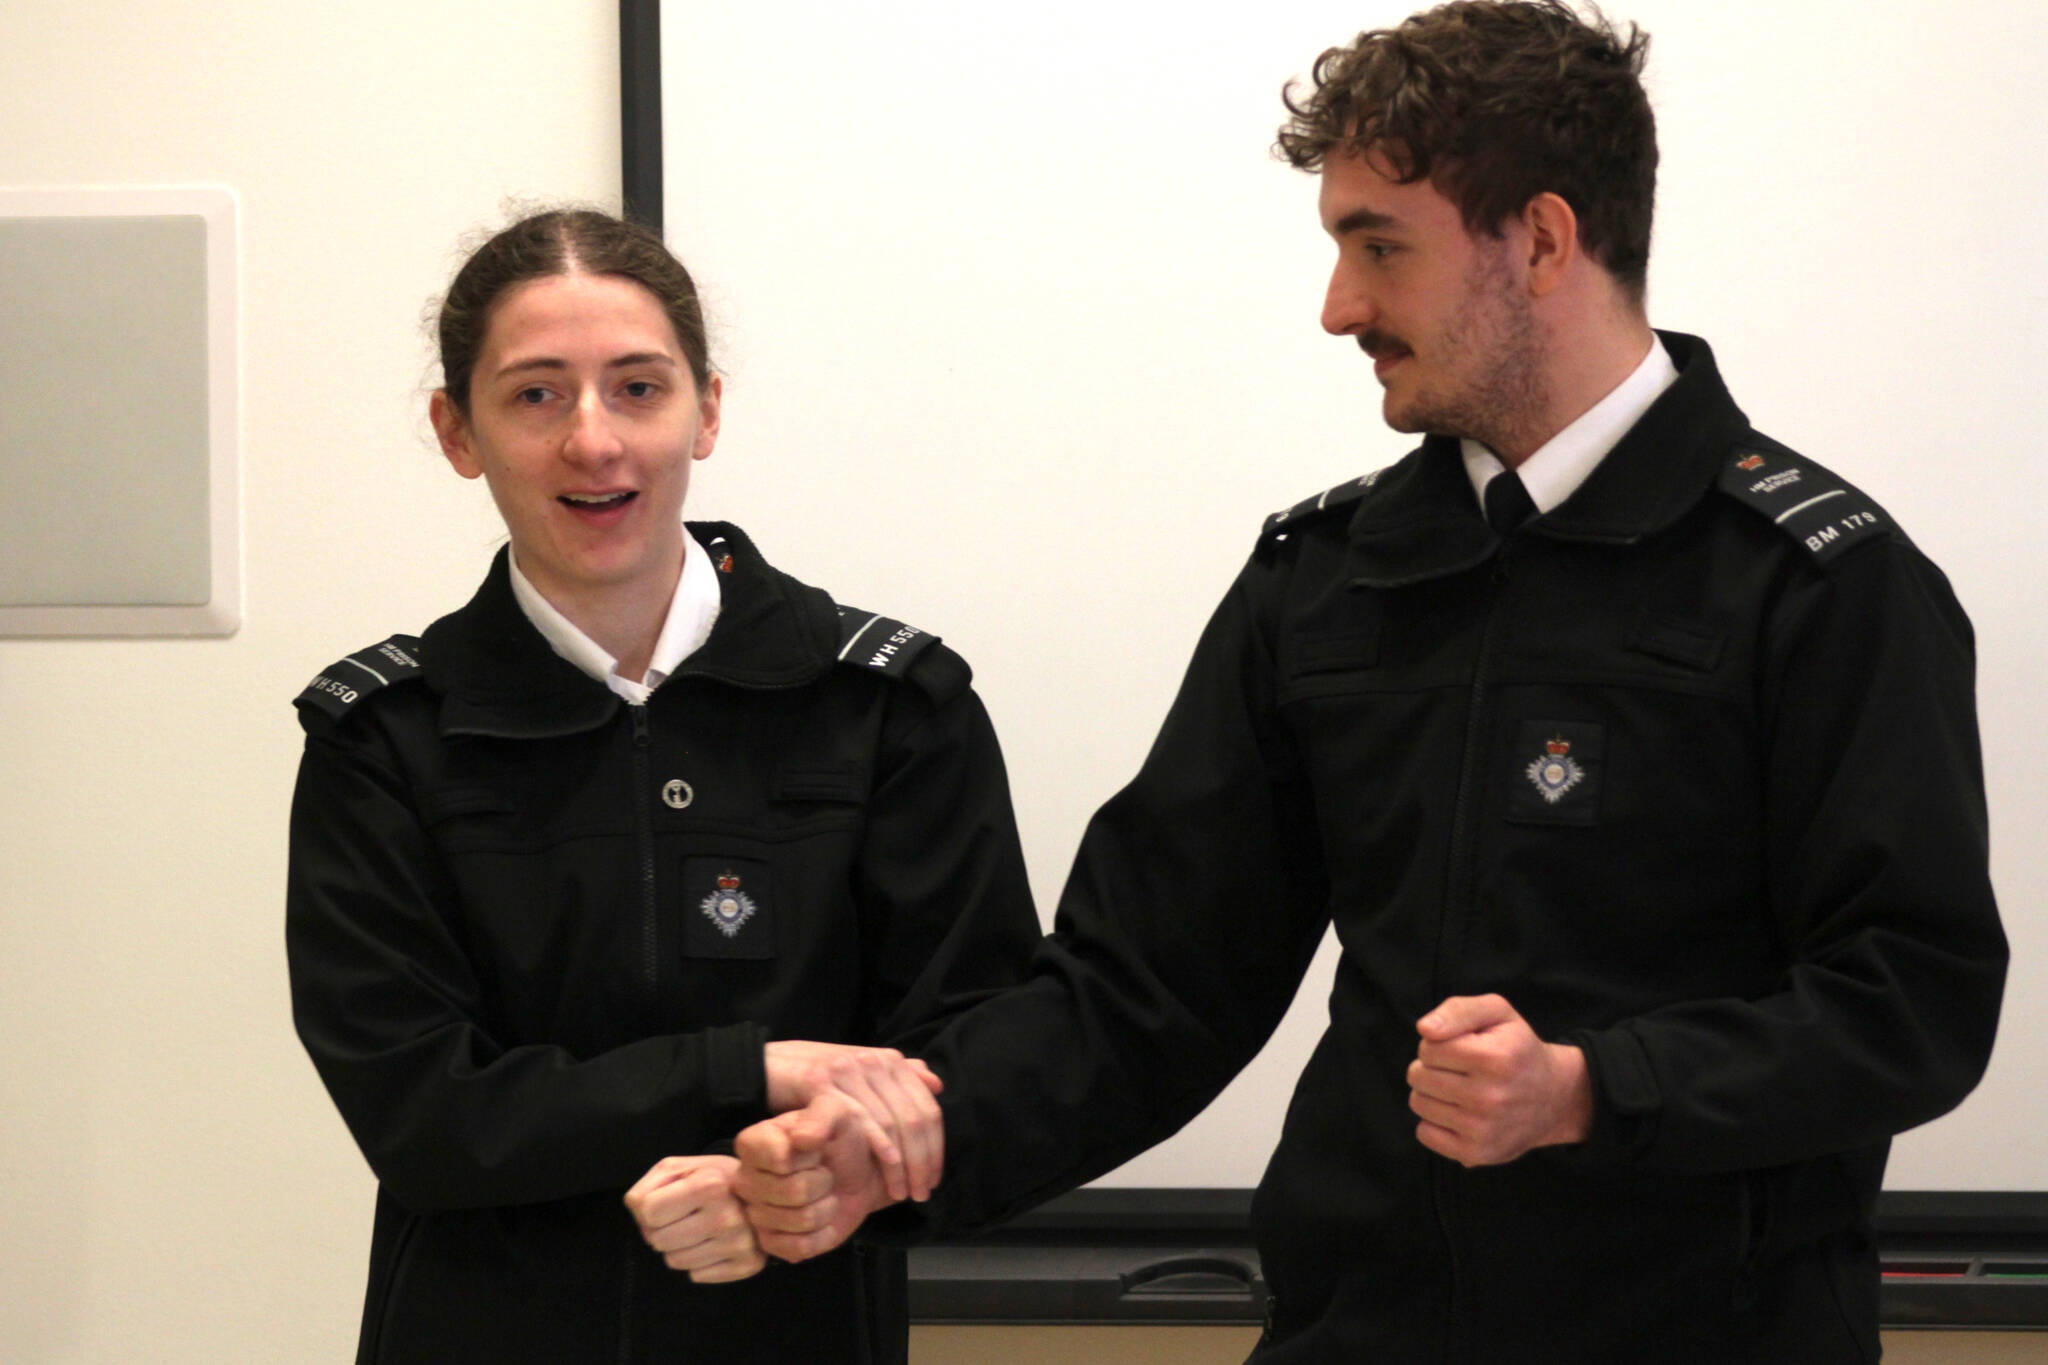 Officer Niamh Donnelly, left, and Officer Daniel Clemson, of His Majesty’s Prison and Probation Service, demonstrate a hold to an international group of corrections personnel at Stafford Creek Corrections Center on April 17 as part of an effort to bring a more human-rights focused approach to corrections. (Michael S. Lockett / The Daily World)